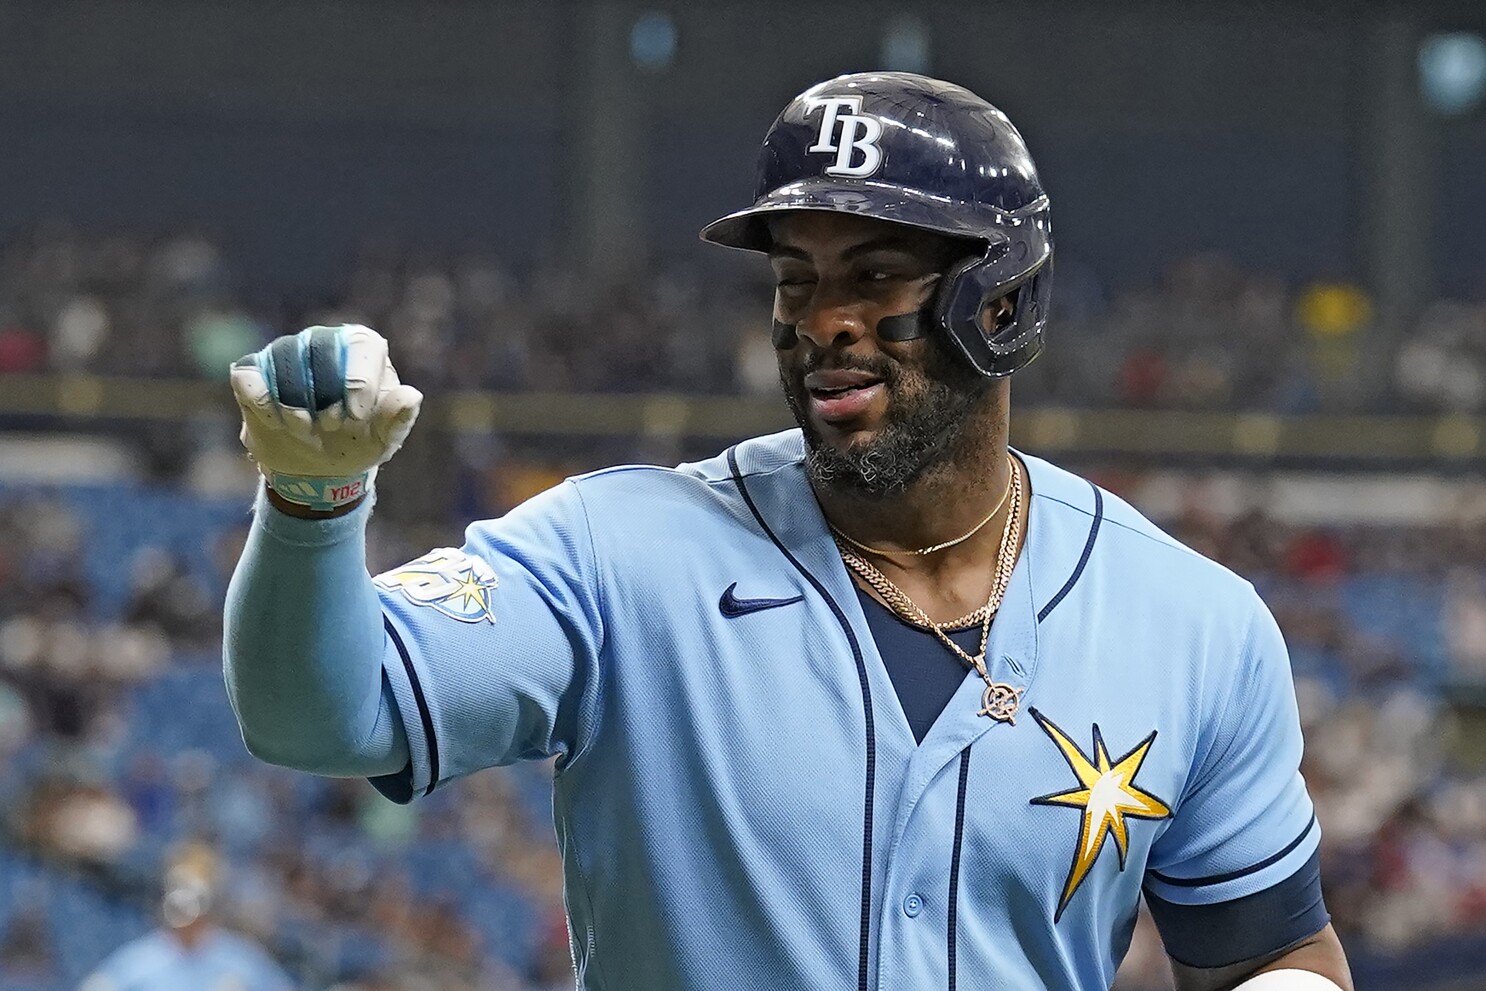 Rays 1B Yandy Díaz leaves game with right hamstring tightness